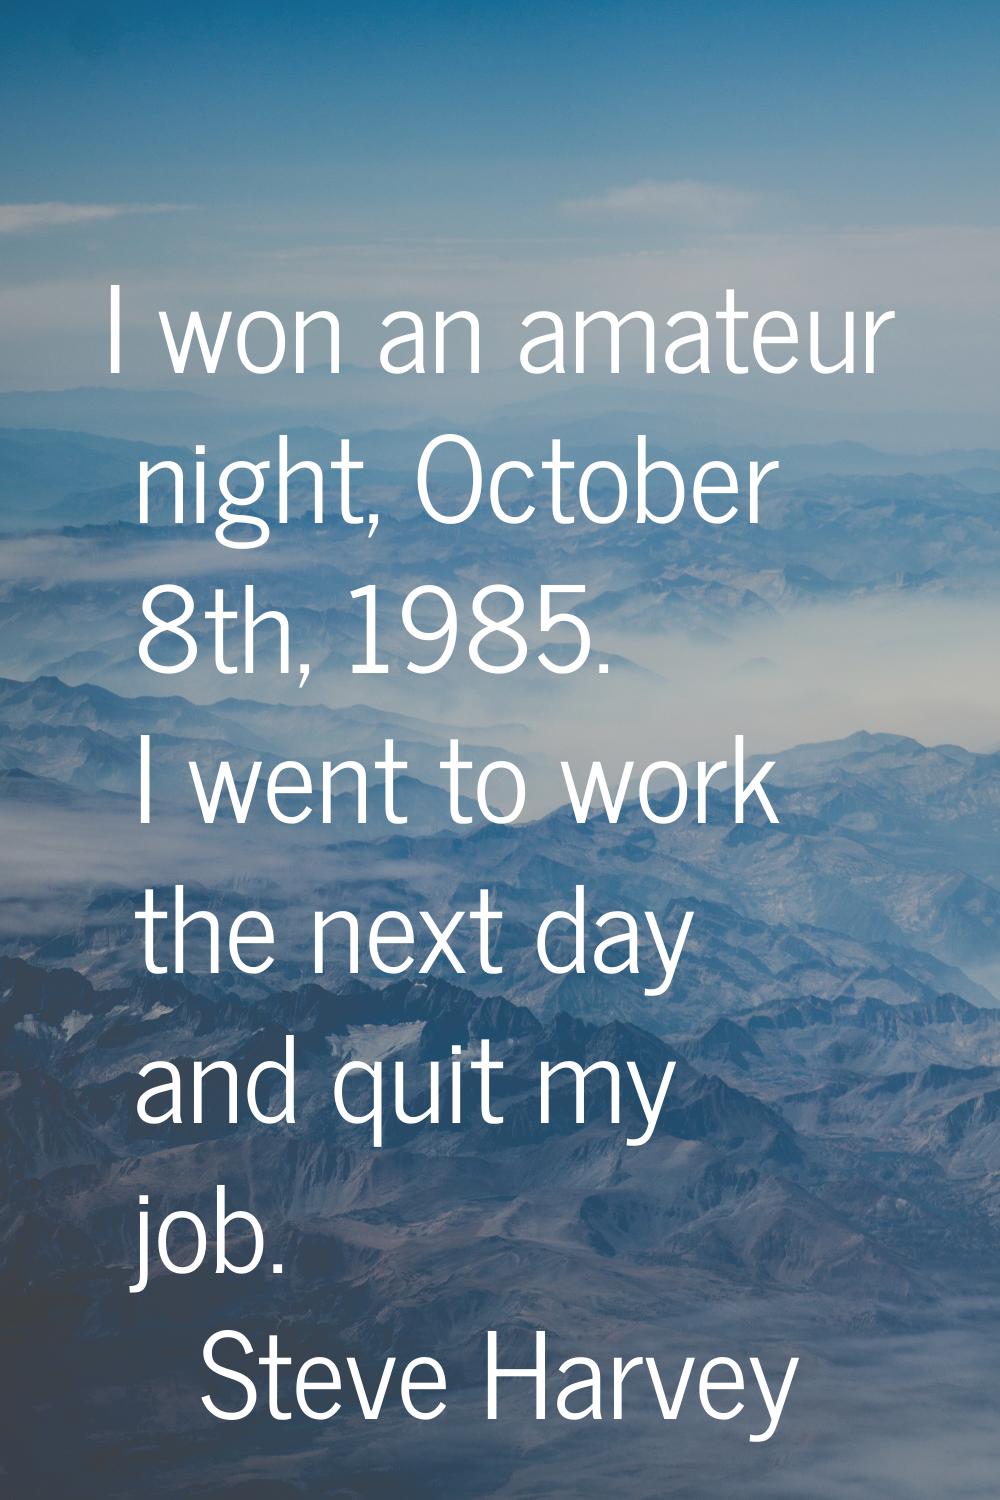 I won an amateur night, October 8th, 1985. I went to work the next day and quit my job.